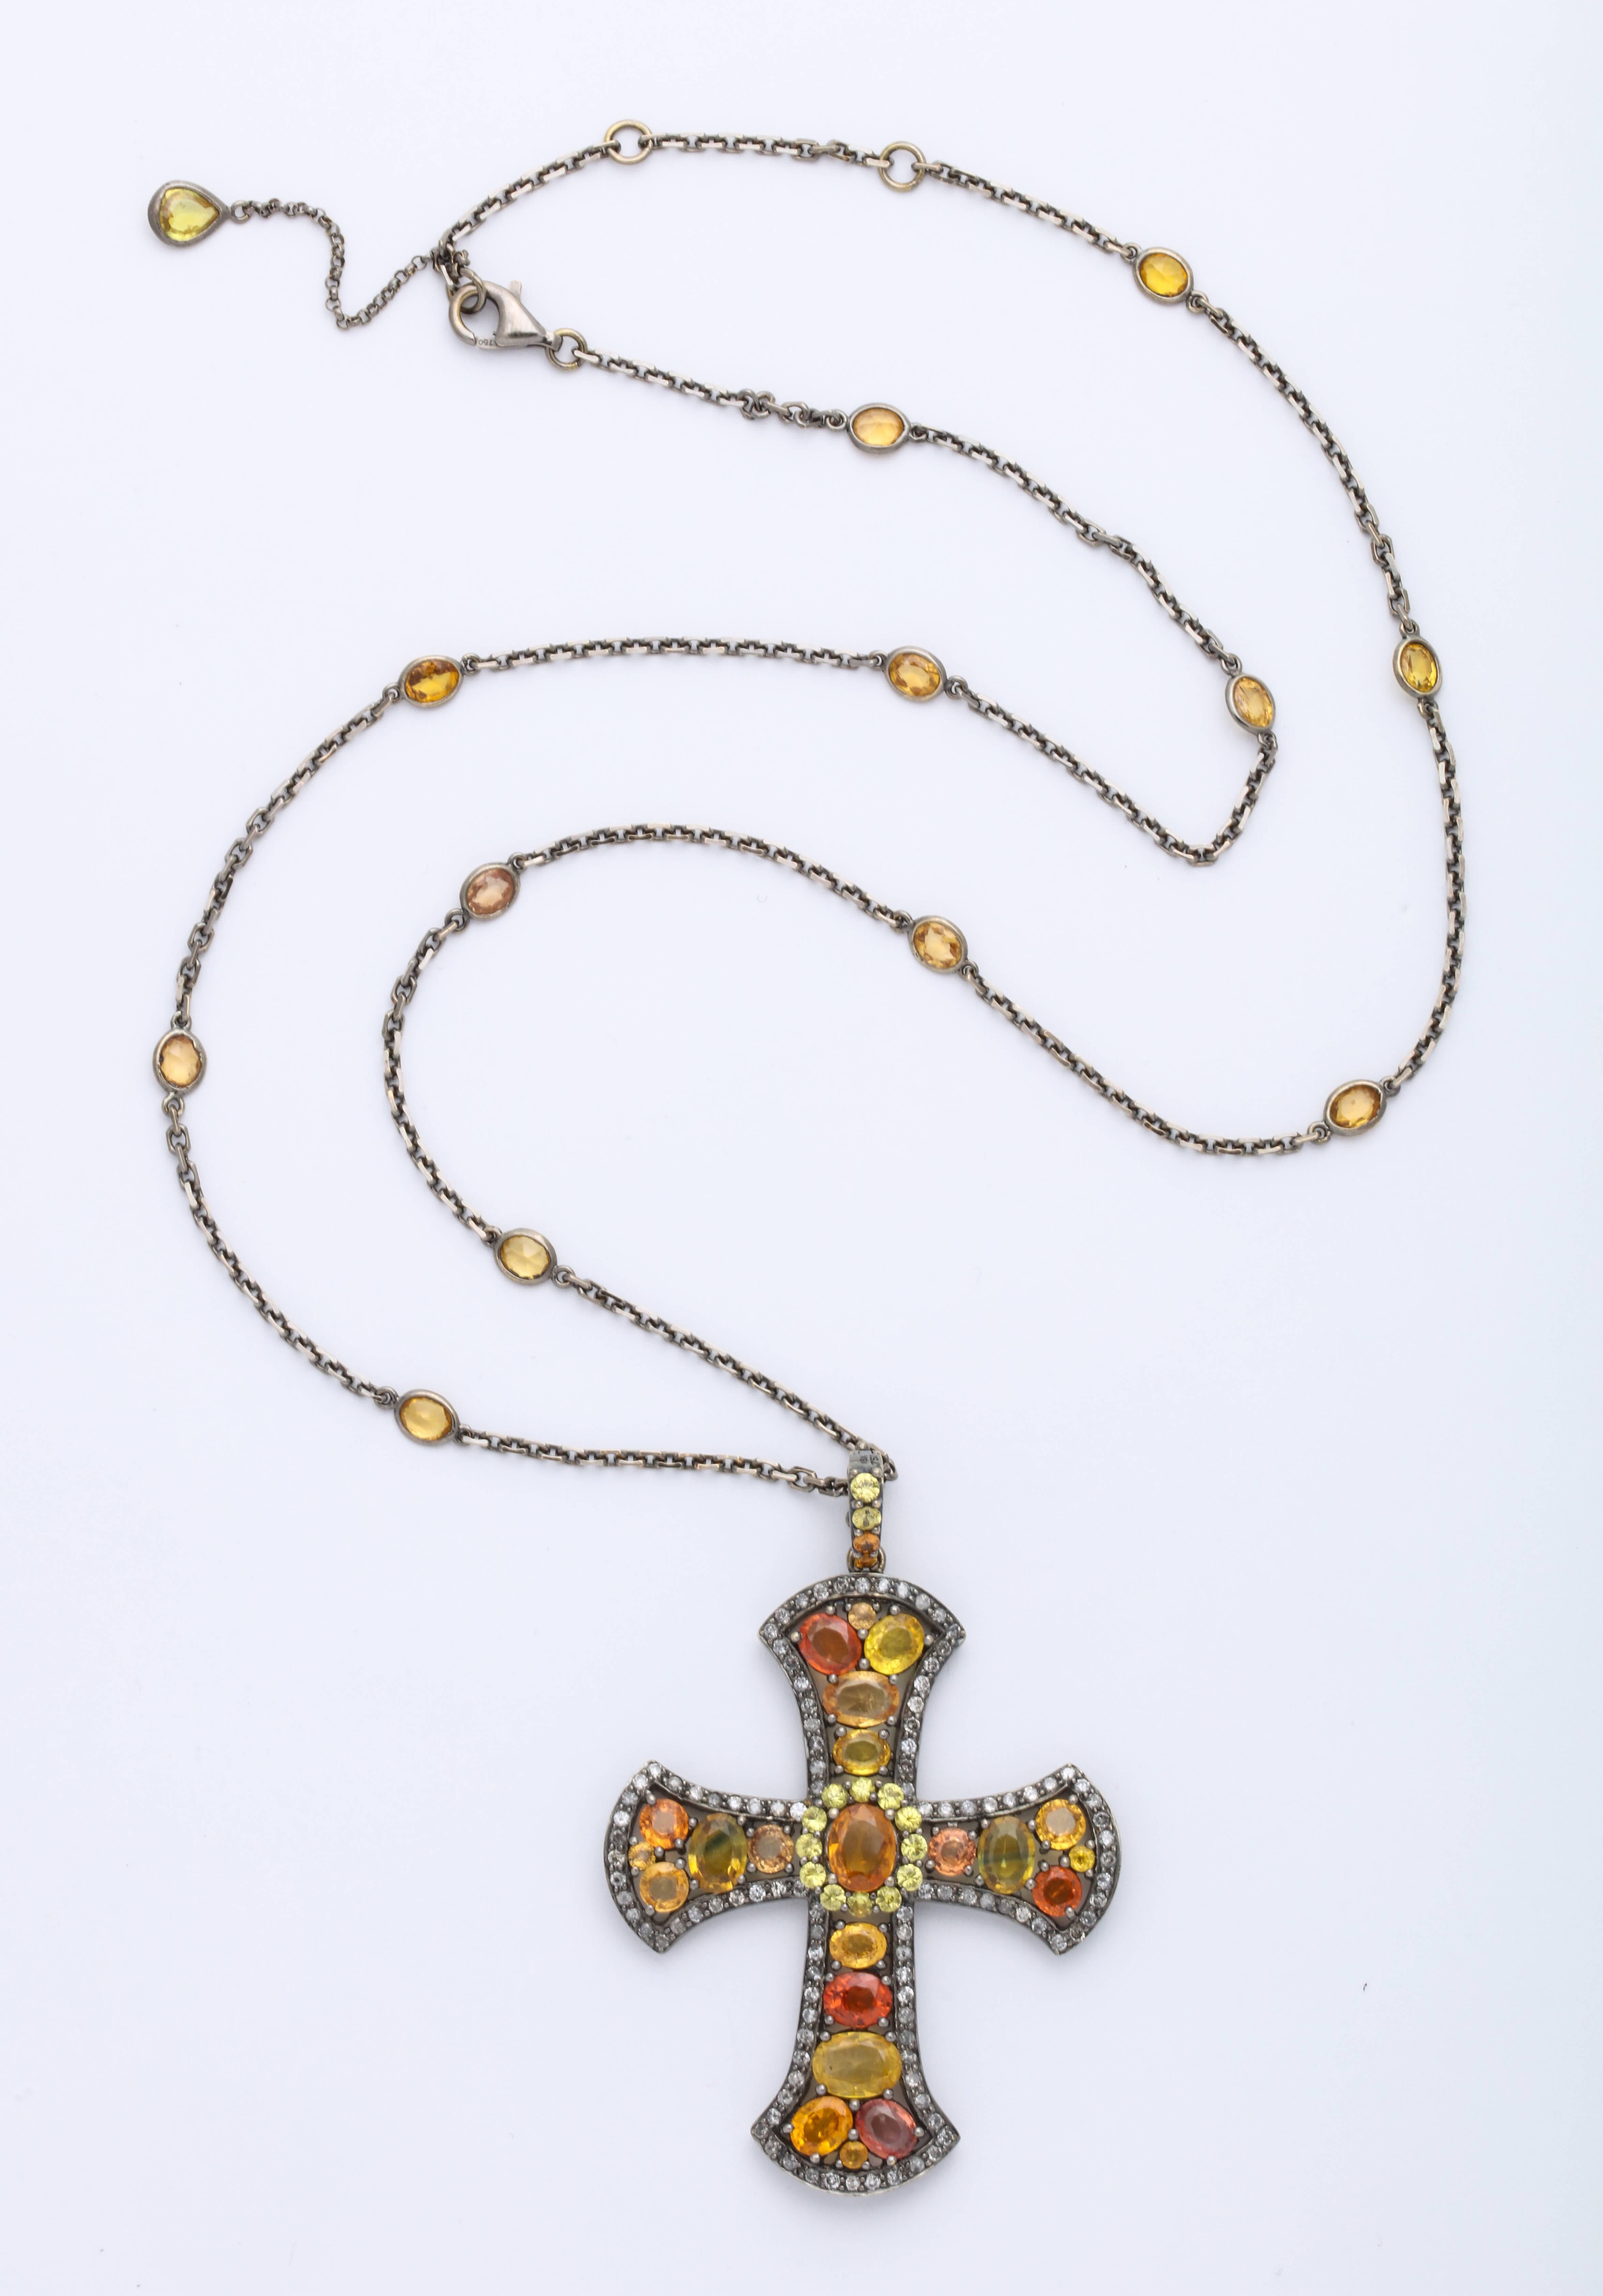 This unique 18 karat gold stylized gothic cross pendant is mounted with multi-color orange sapphires: 18.51 carats, decorated with round brilliant cut diamond trim weighing 1.65 carats, and suspended from a link chain with integrated bezel-set oval